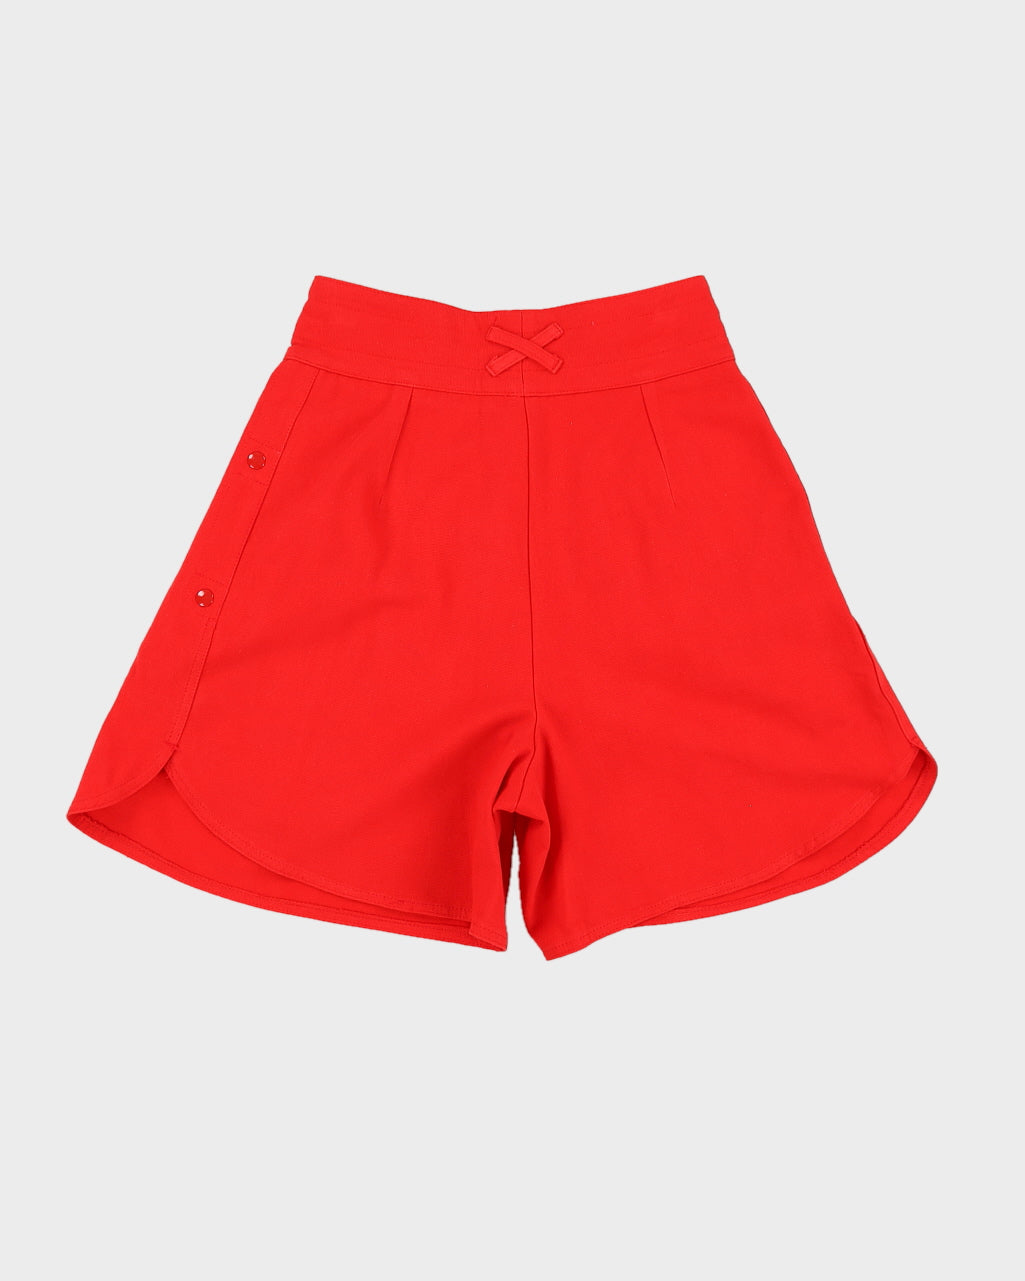 Vintage 70s Benetton High Waisted Red Shorts - W28